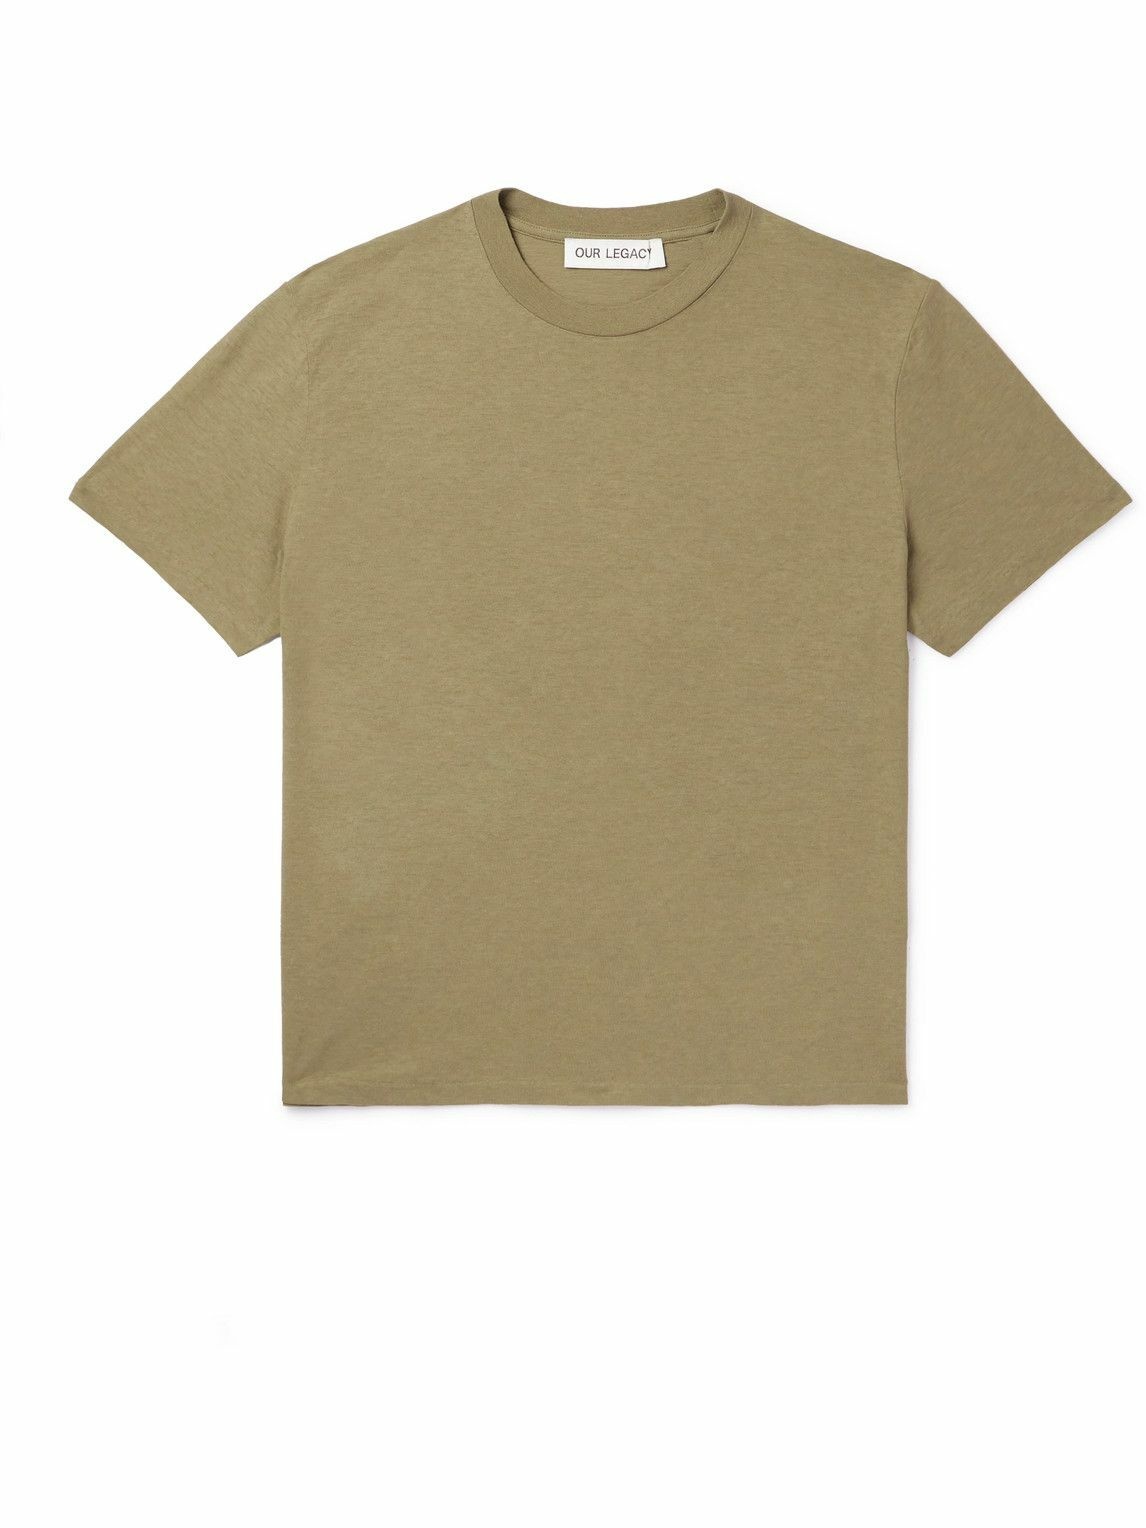 Our Legacy - Hover Cotton-Jersey T-Shirt - Green Our Legacy